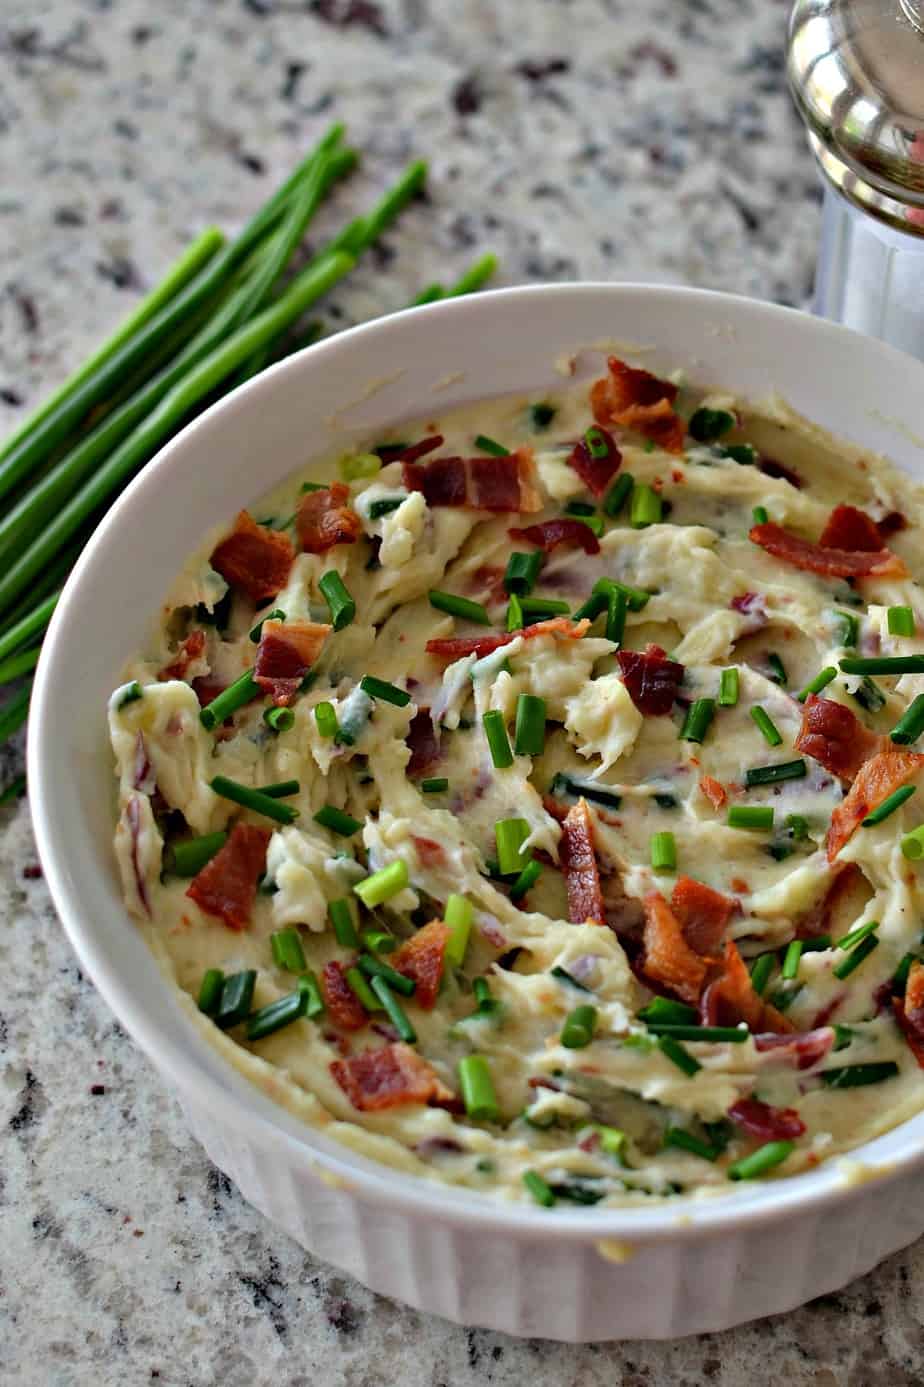 Garlic Mashed Potatoes is the perfect side dish for all of your barbecue, beef, chicken and pork entrees.